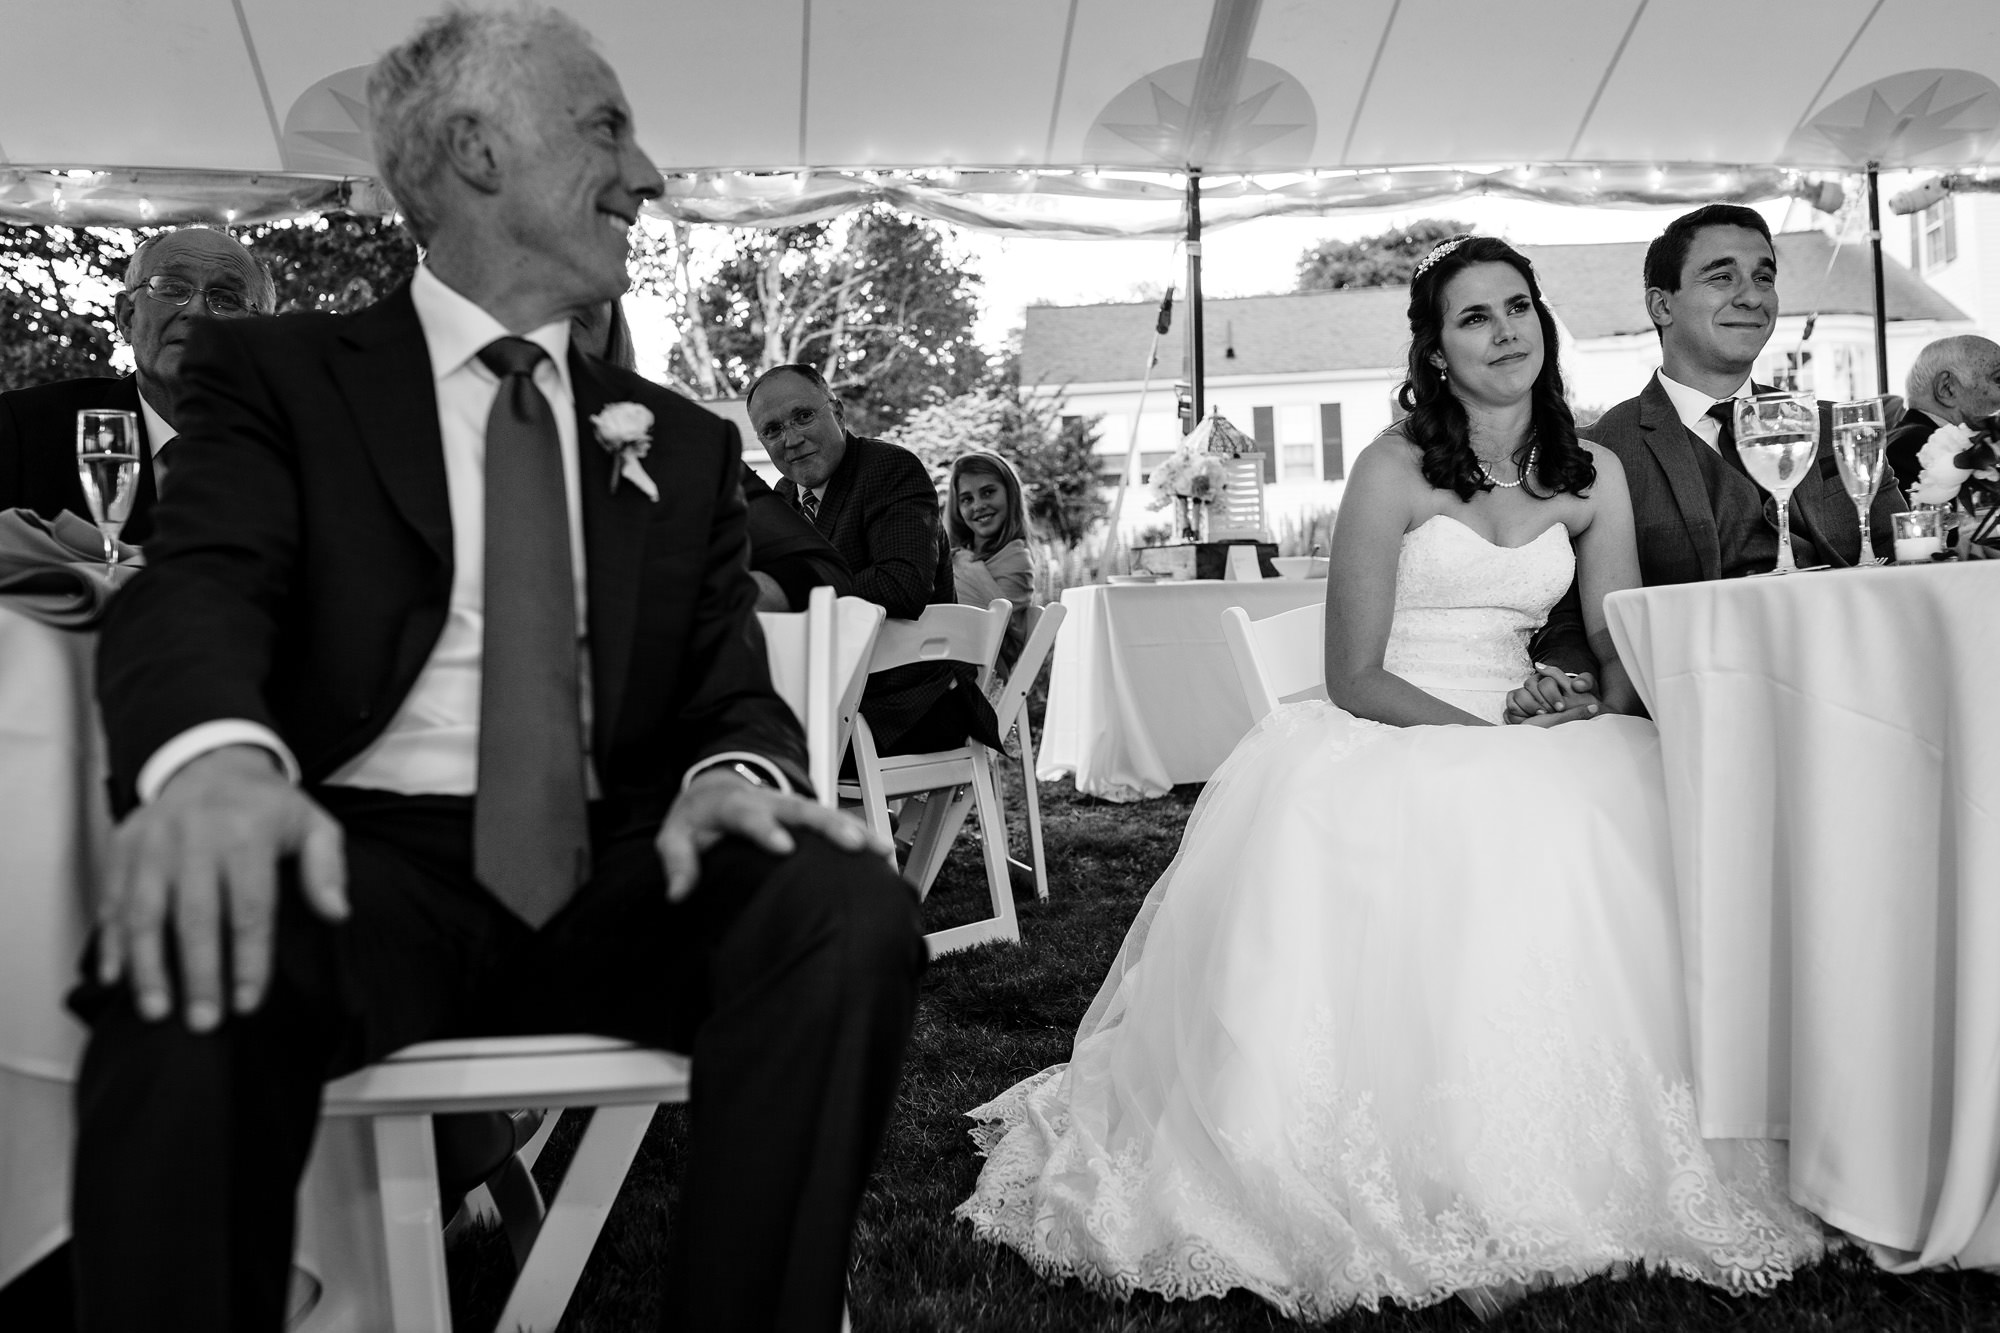 A bride adn groom share an emotional moment during their Maine wedding reception.